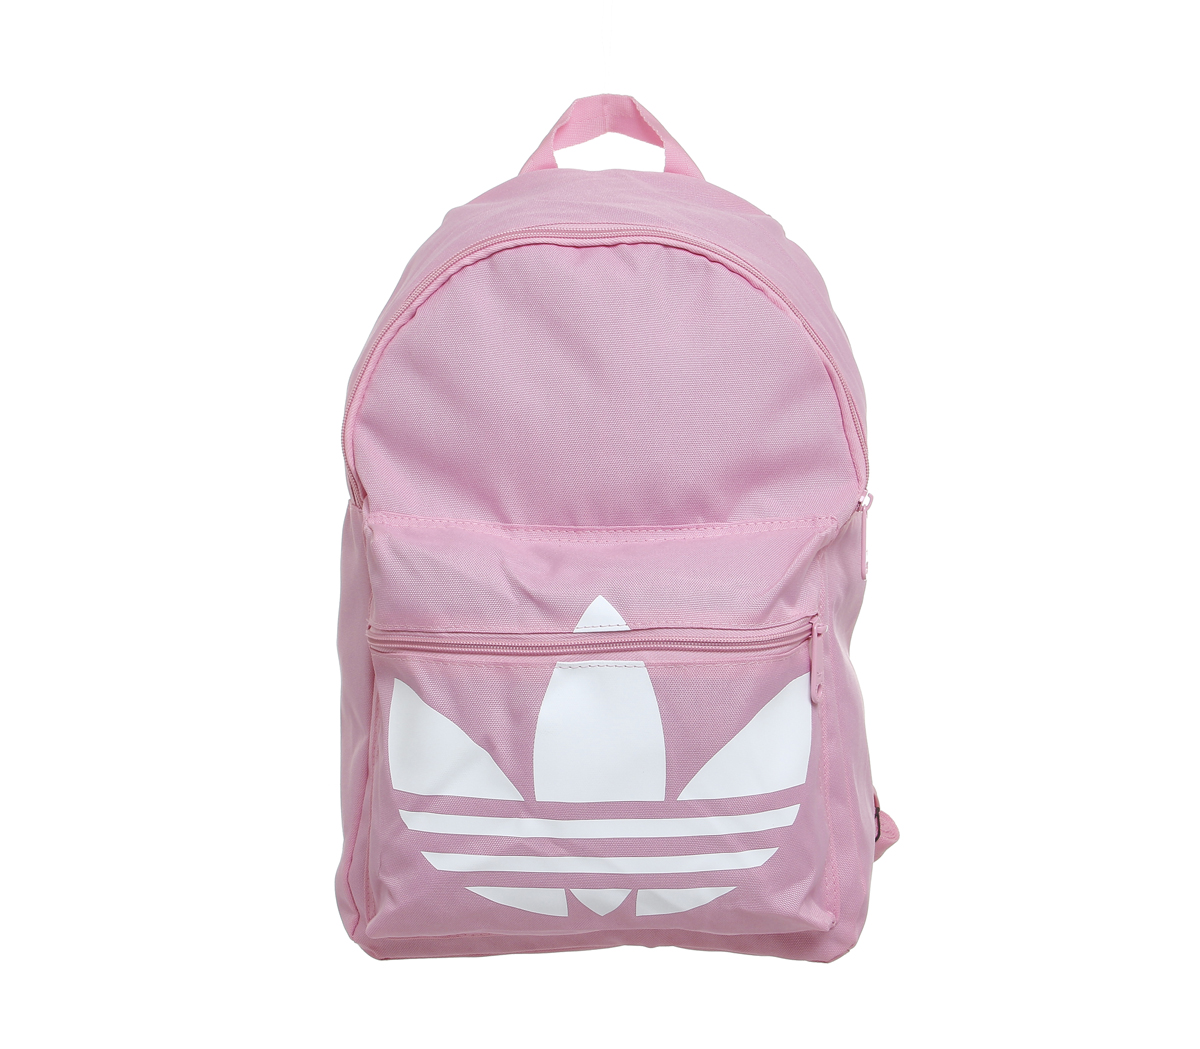 adidas Trefoil Backpack Light Pink White - Accessories